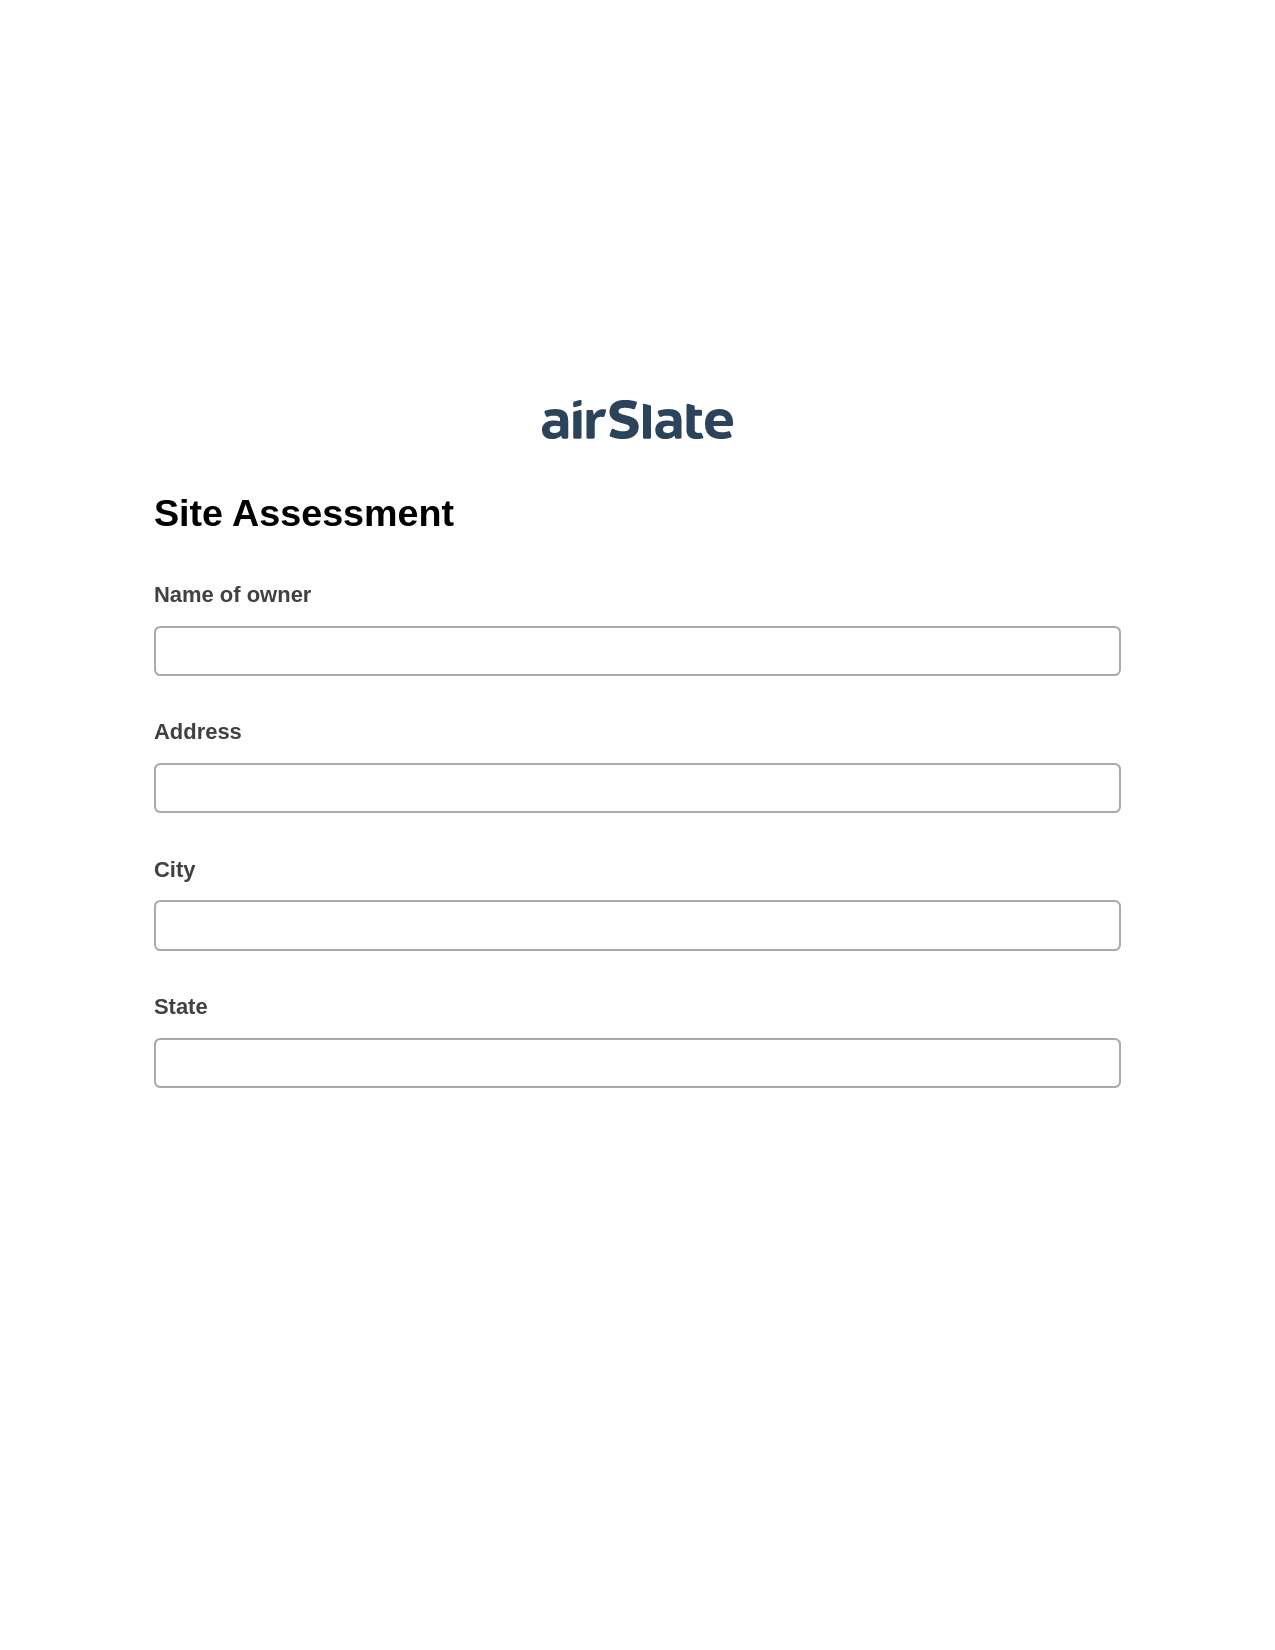 Site Assessment Pre-fill from NetSuite Records Bot, Update Salesforce Record Bot, Post-finish Document Bot